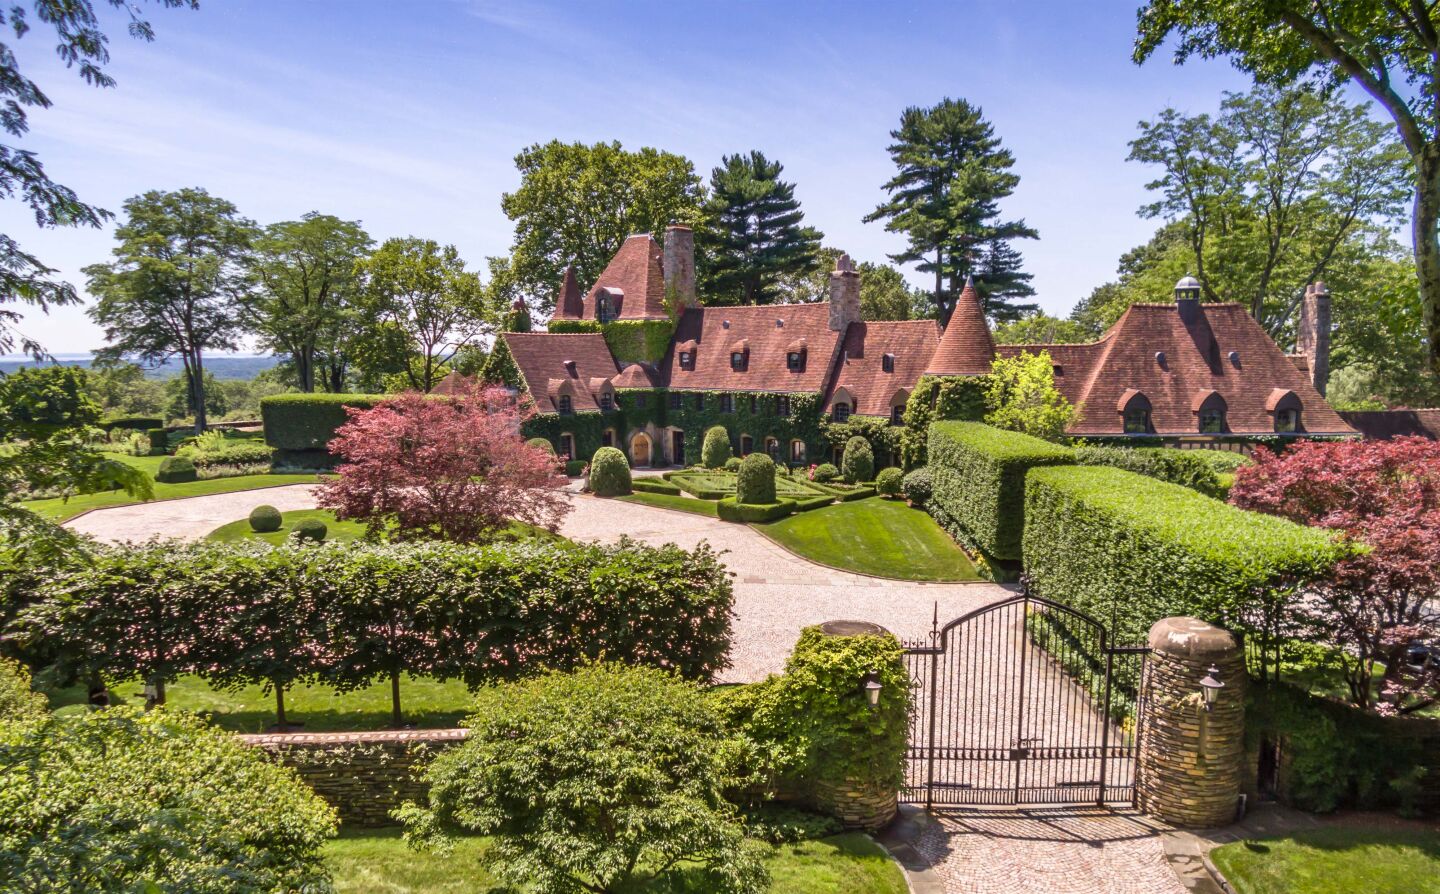 The 13,000-square-foot manor.